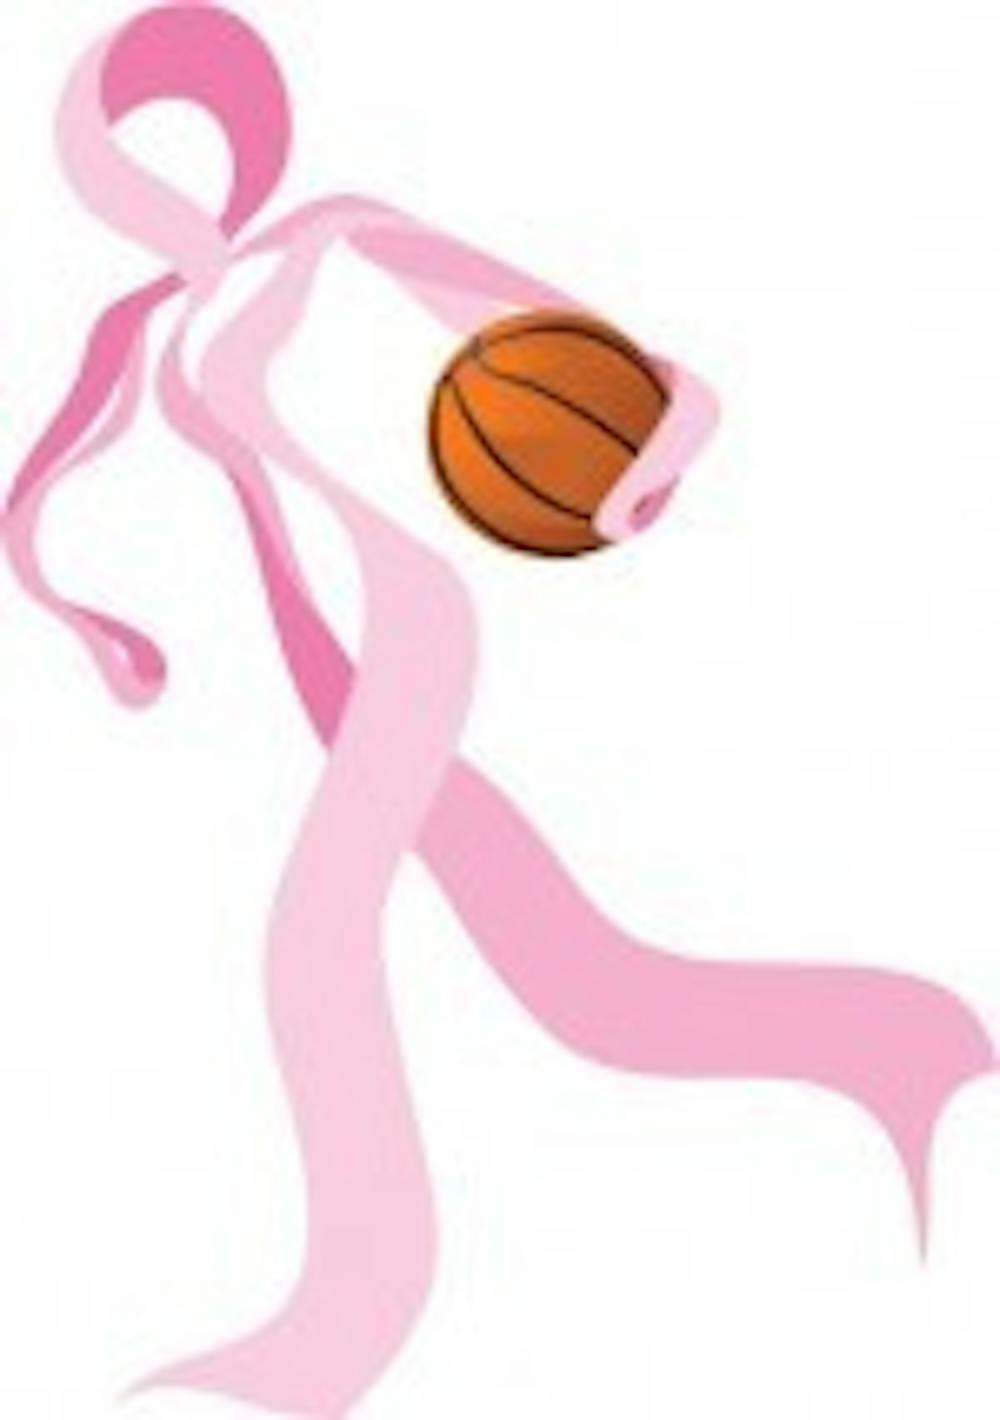 Basketball Chases Away Breast Cancer